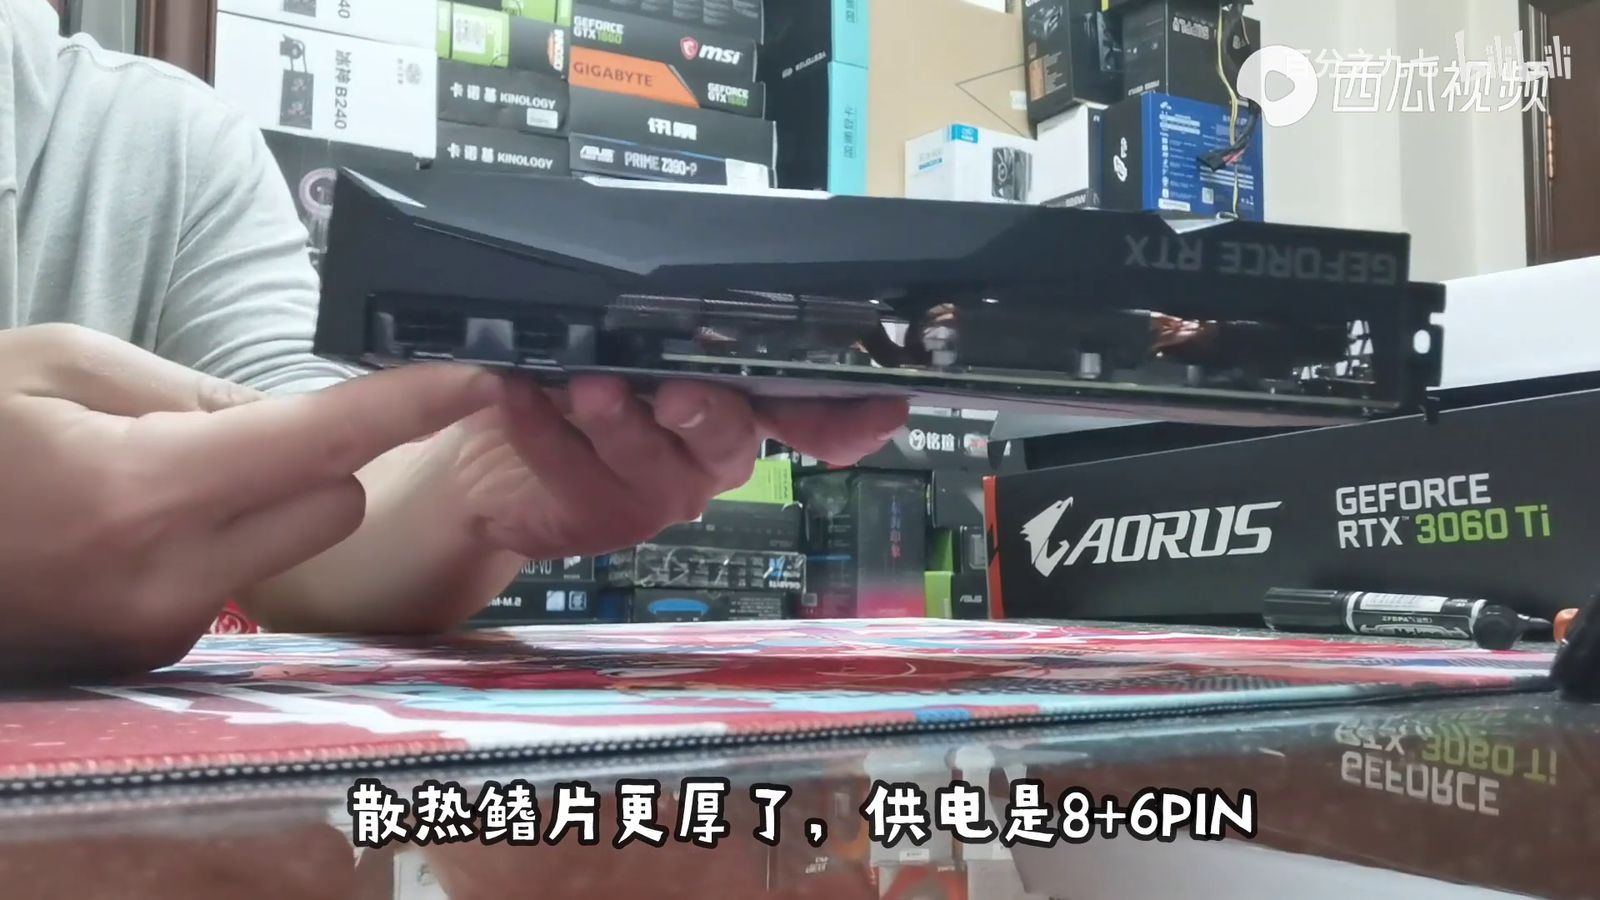 Unboxing of all Gigabyte GeForce RTX 3060 Ti graphics cards leaks 